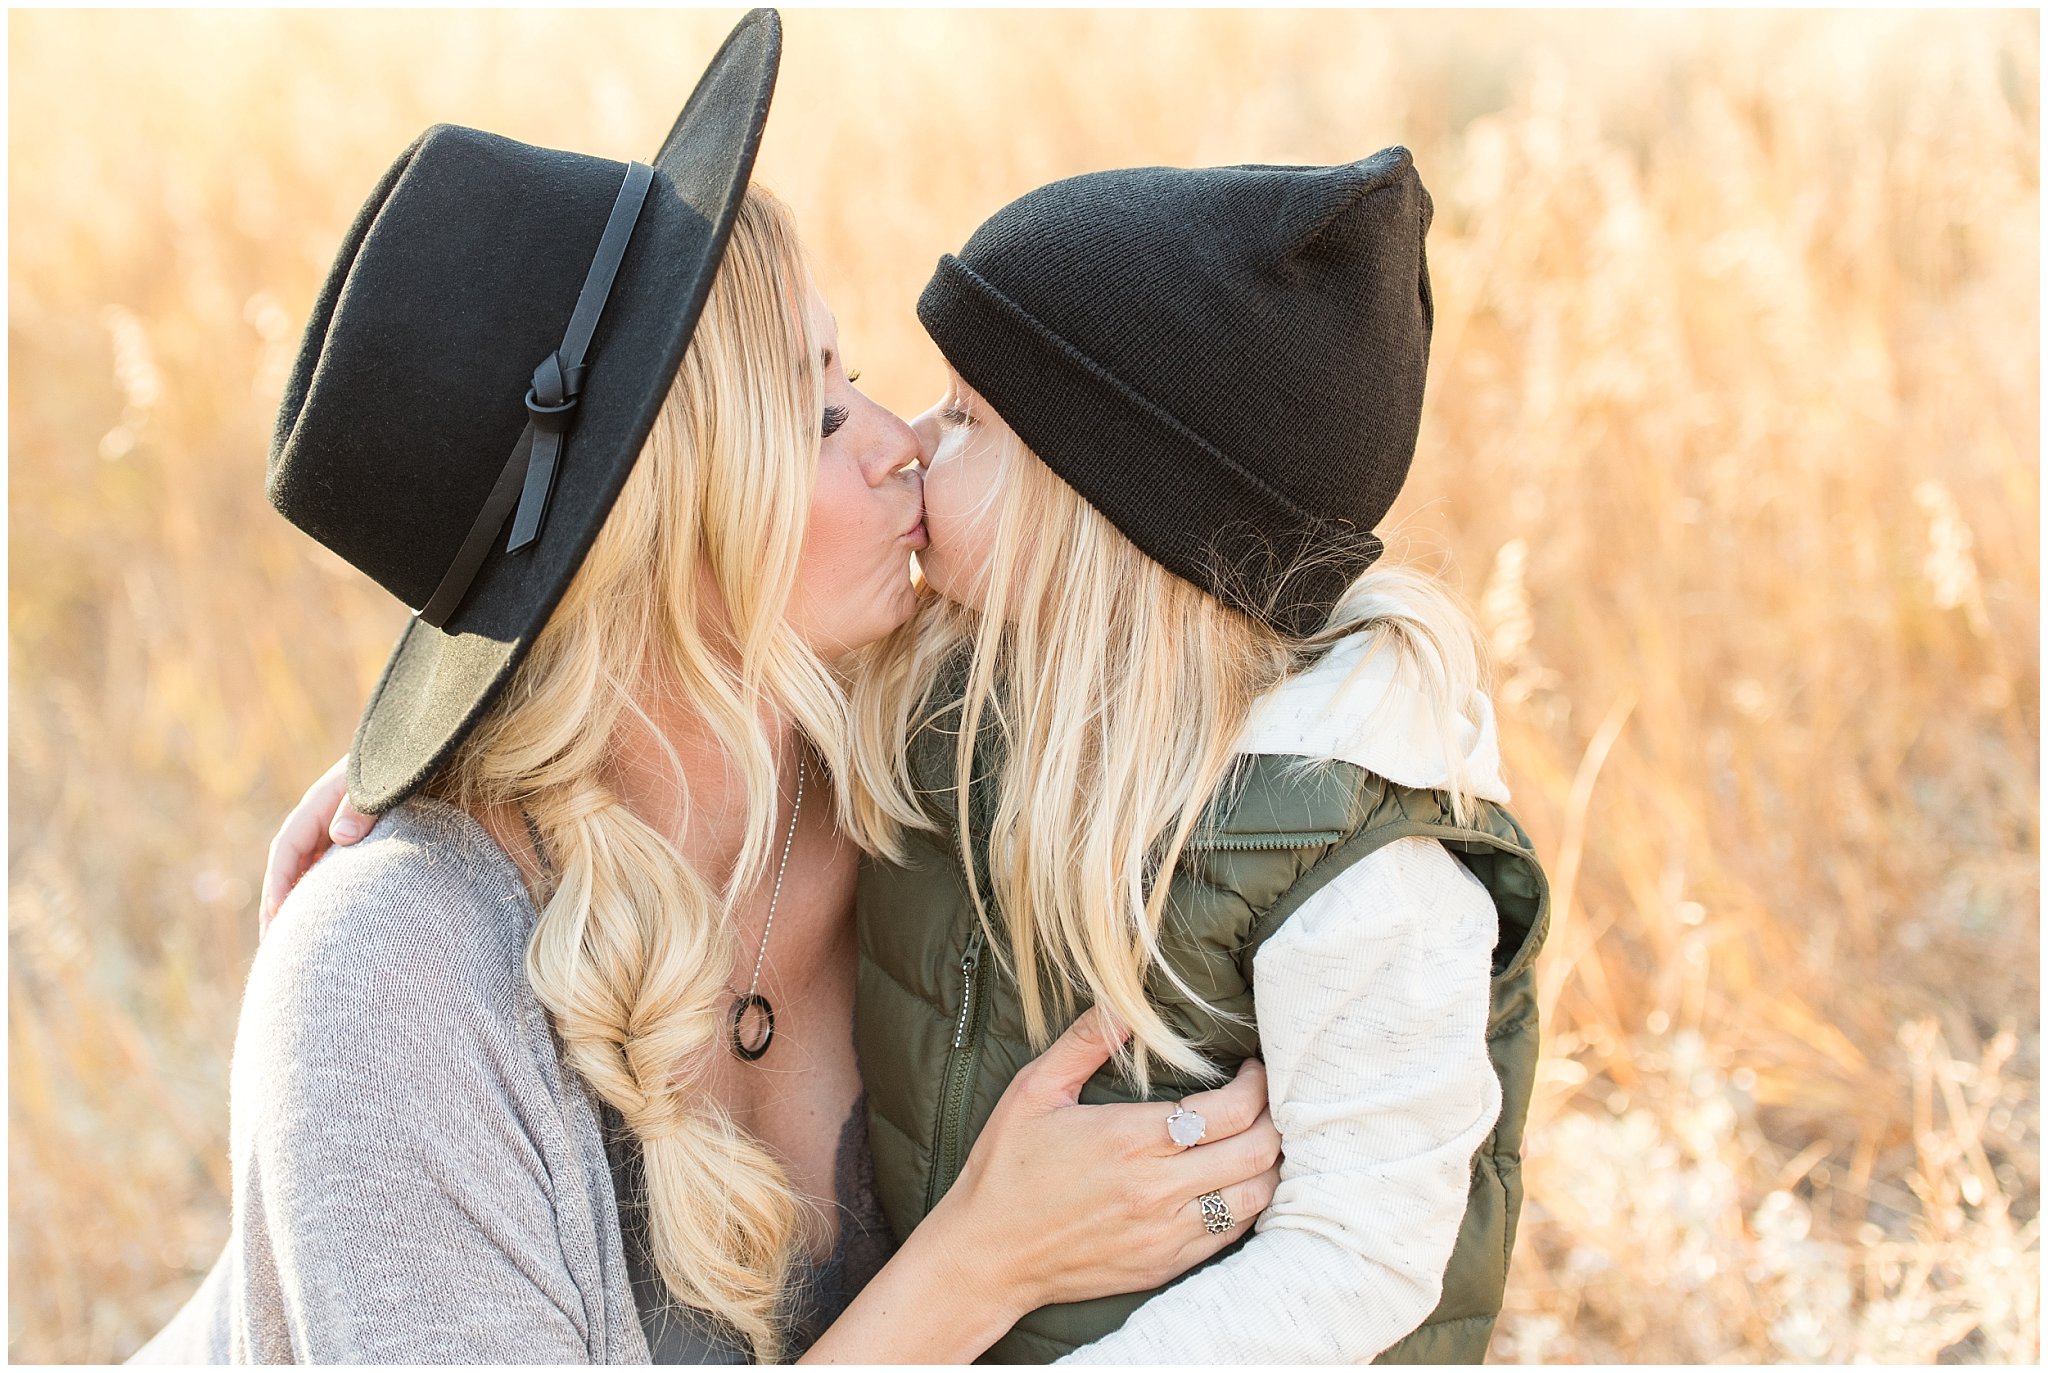 Son giving mom a kiss during fall family pictures | Fall Family Pictures in the Mountains | Snowbasin, Utah | Jessie and Dallin